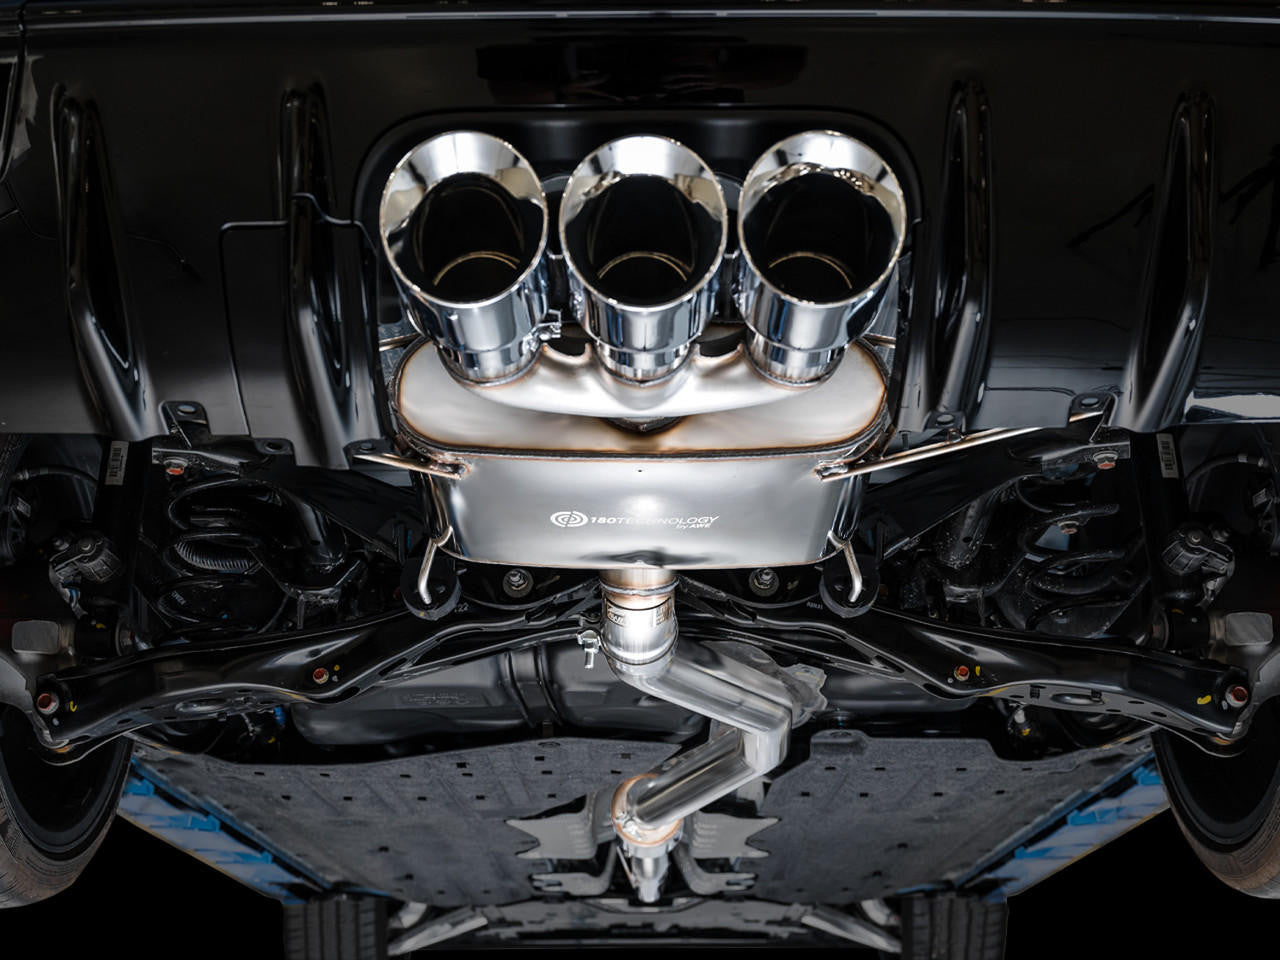 AWE Tuning AWE Touring Edition Exhaust for FL5 Civic Type R - Triple Chrome Silver Tips 3015-52287 